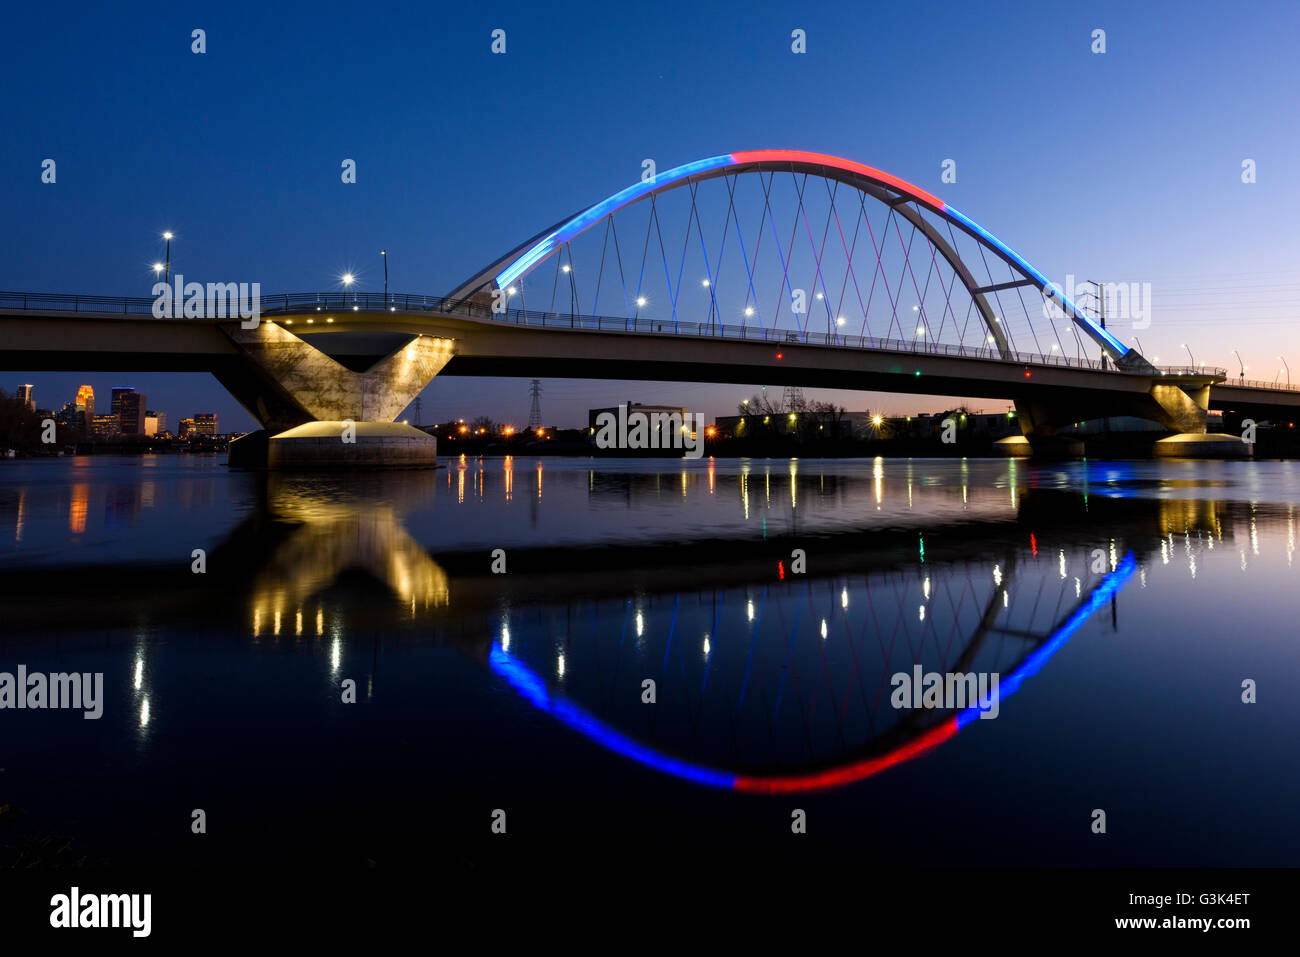 Lowry Avenue bridge in Minneapolis, Minnesota at dusk with blue and red lighting. Stock Photo